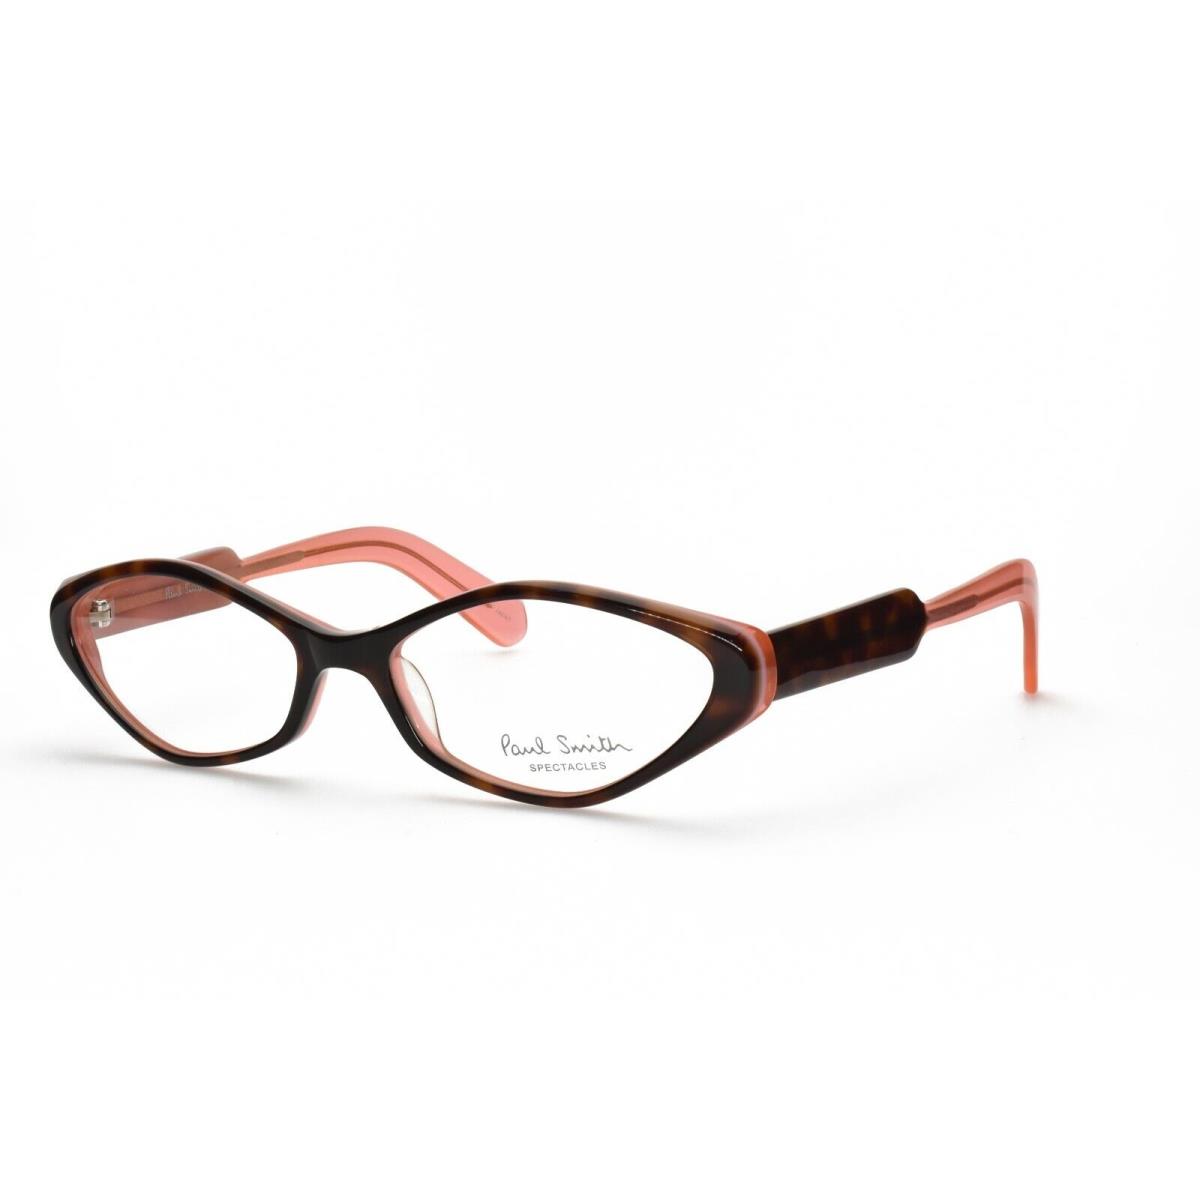 Paul Smith PS 290 Oabl Eyeglasses Frames Only 52-16-135